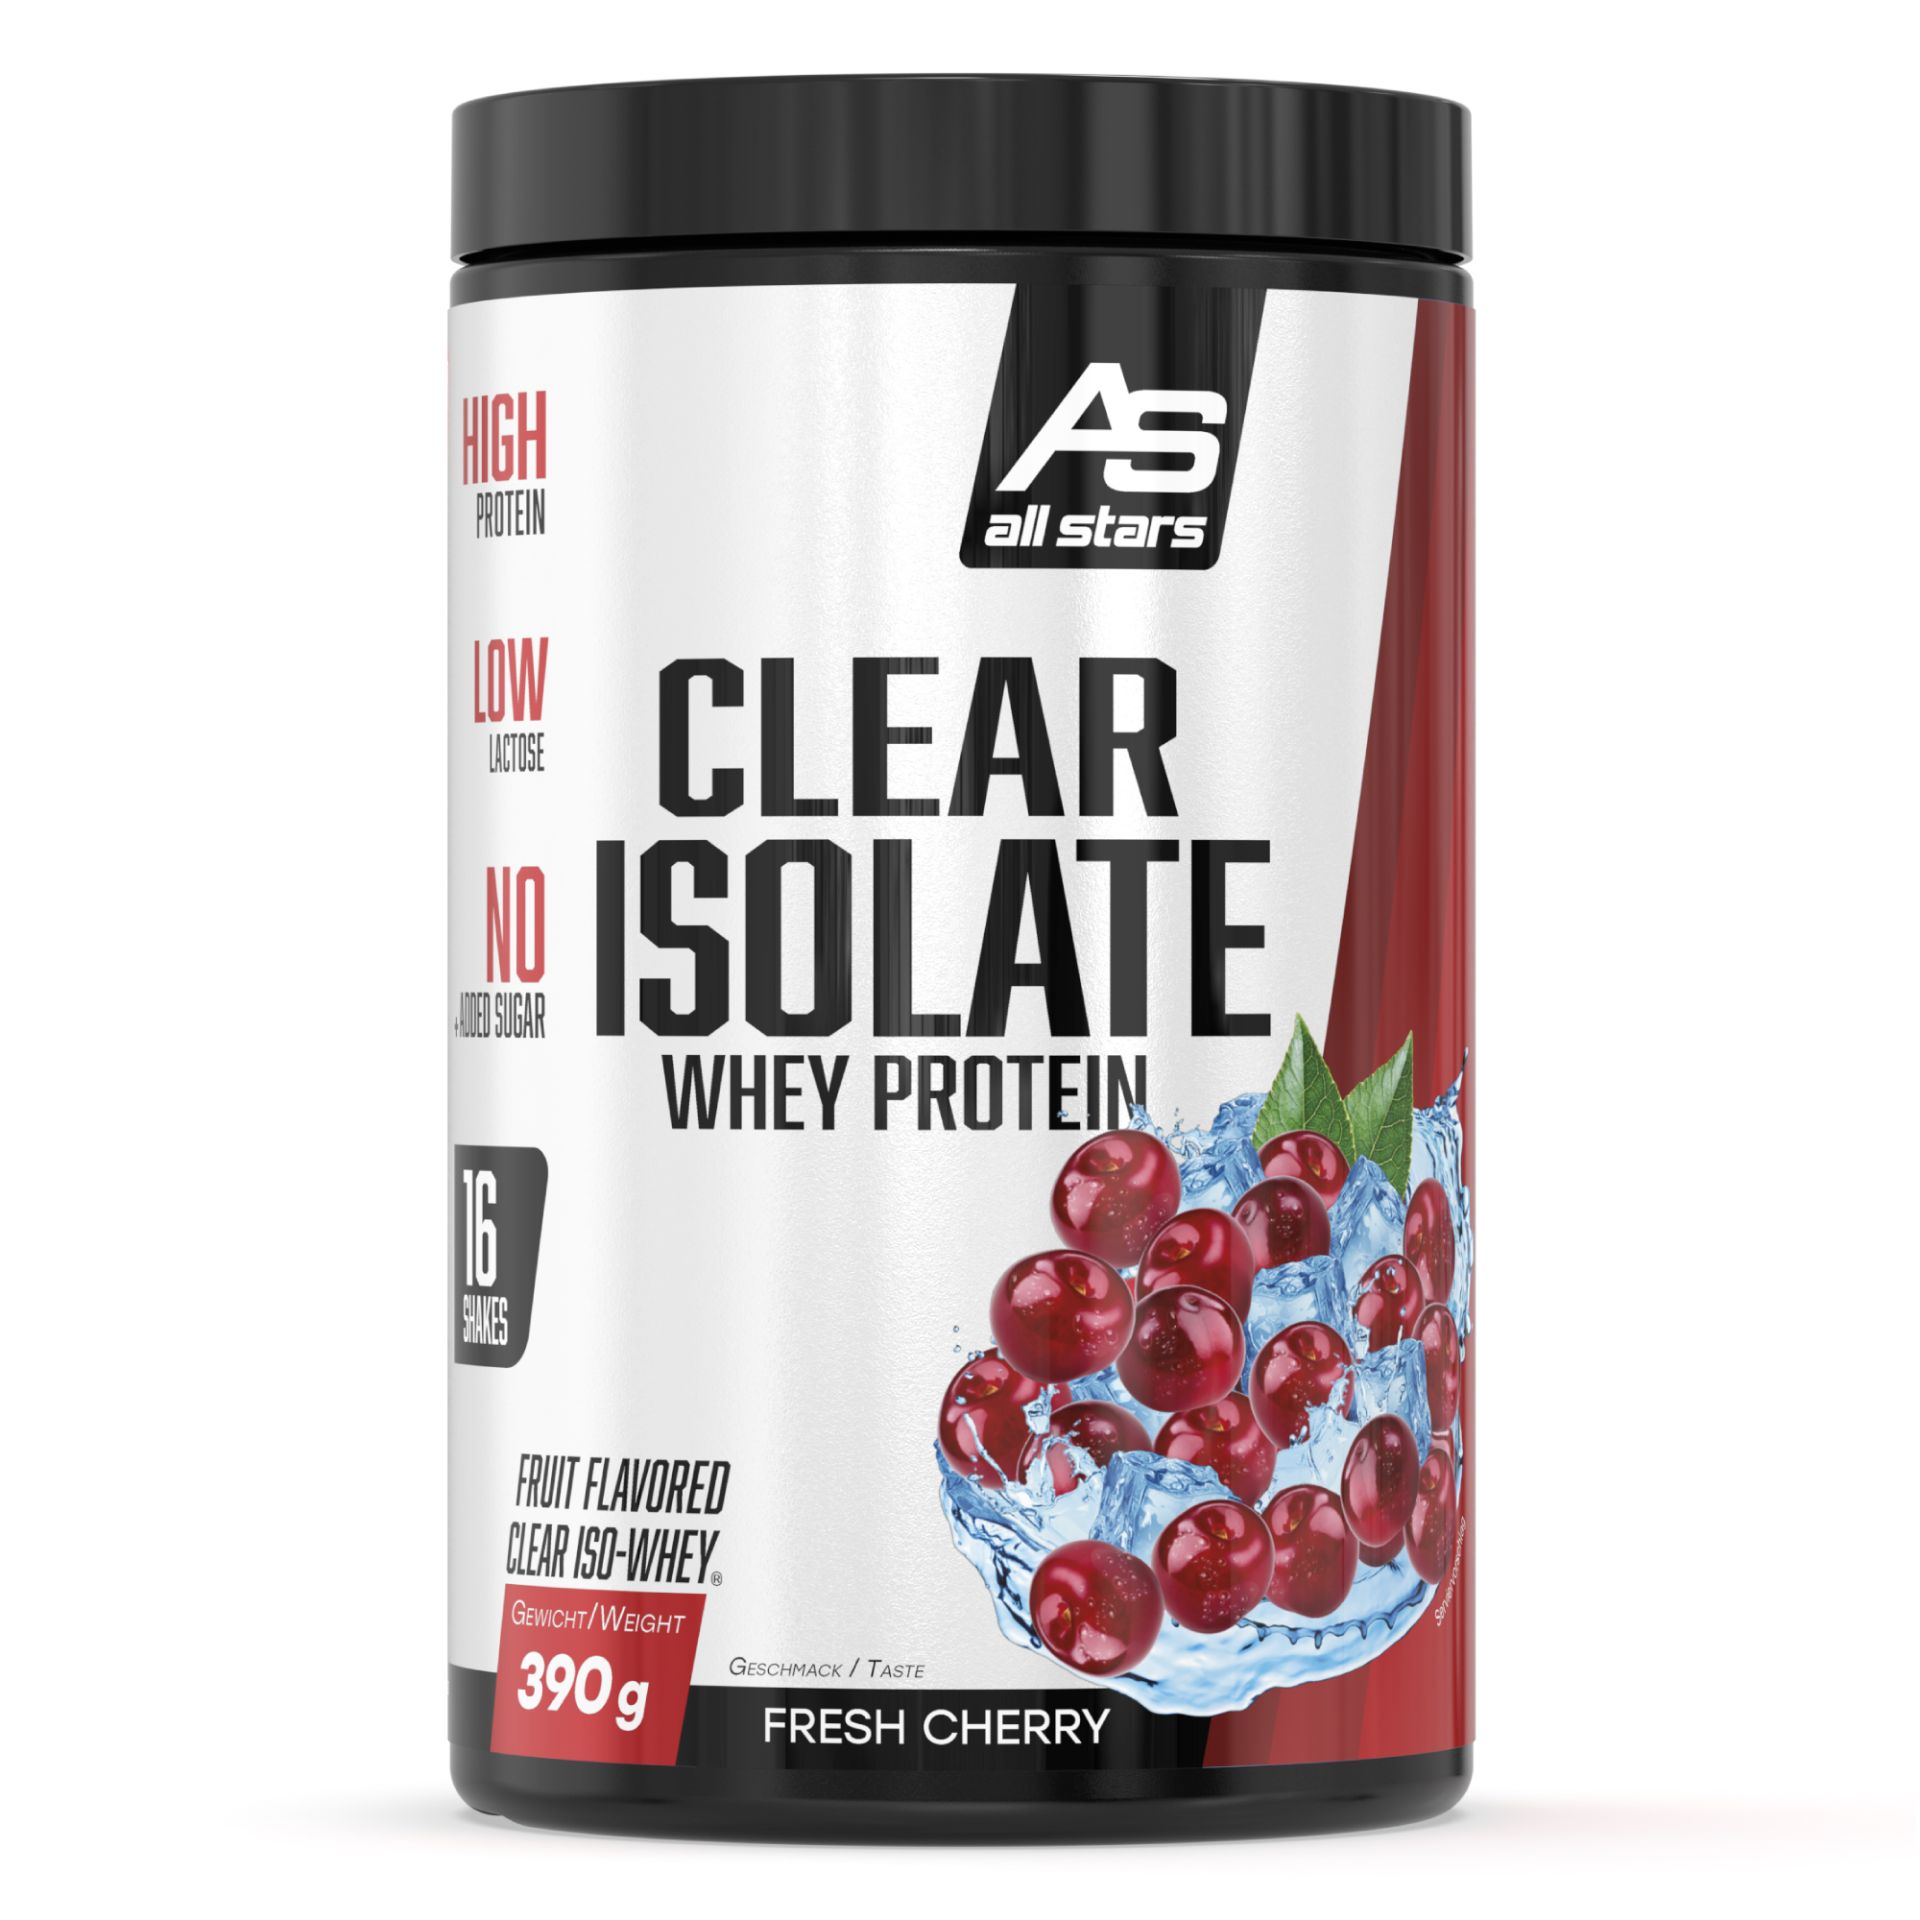 All Stars Clear Isolate Whey Protein (390g Dose)